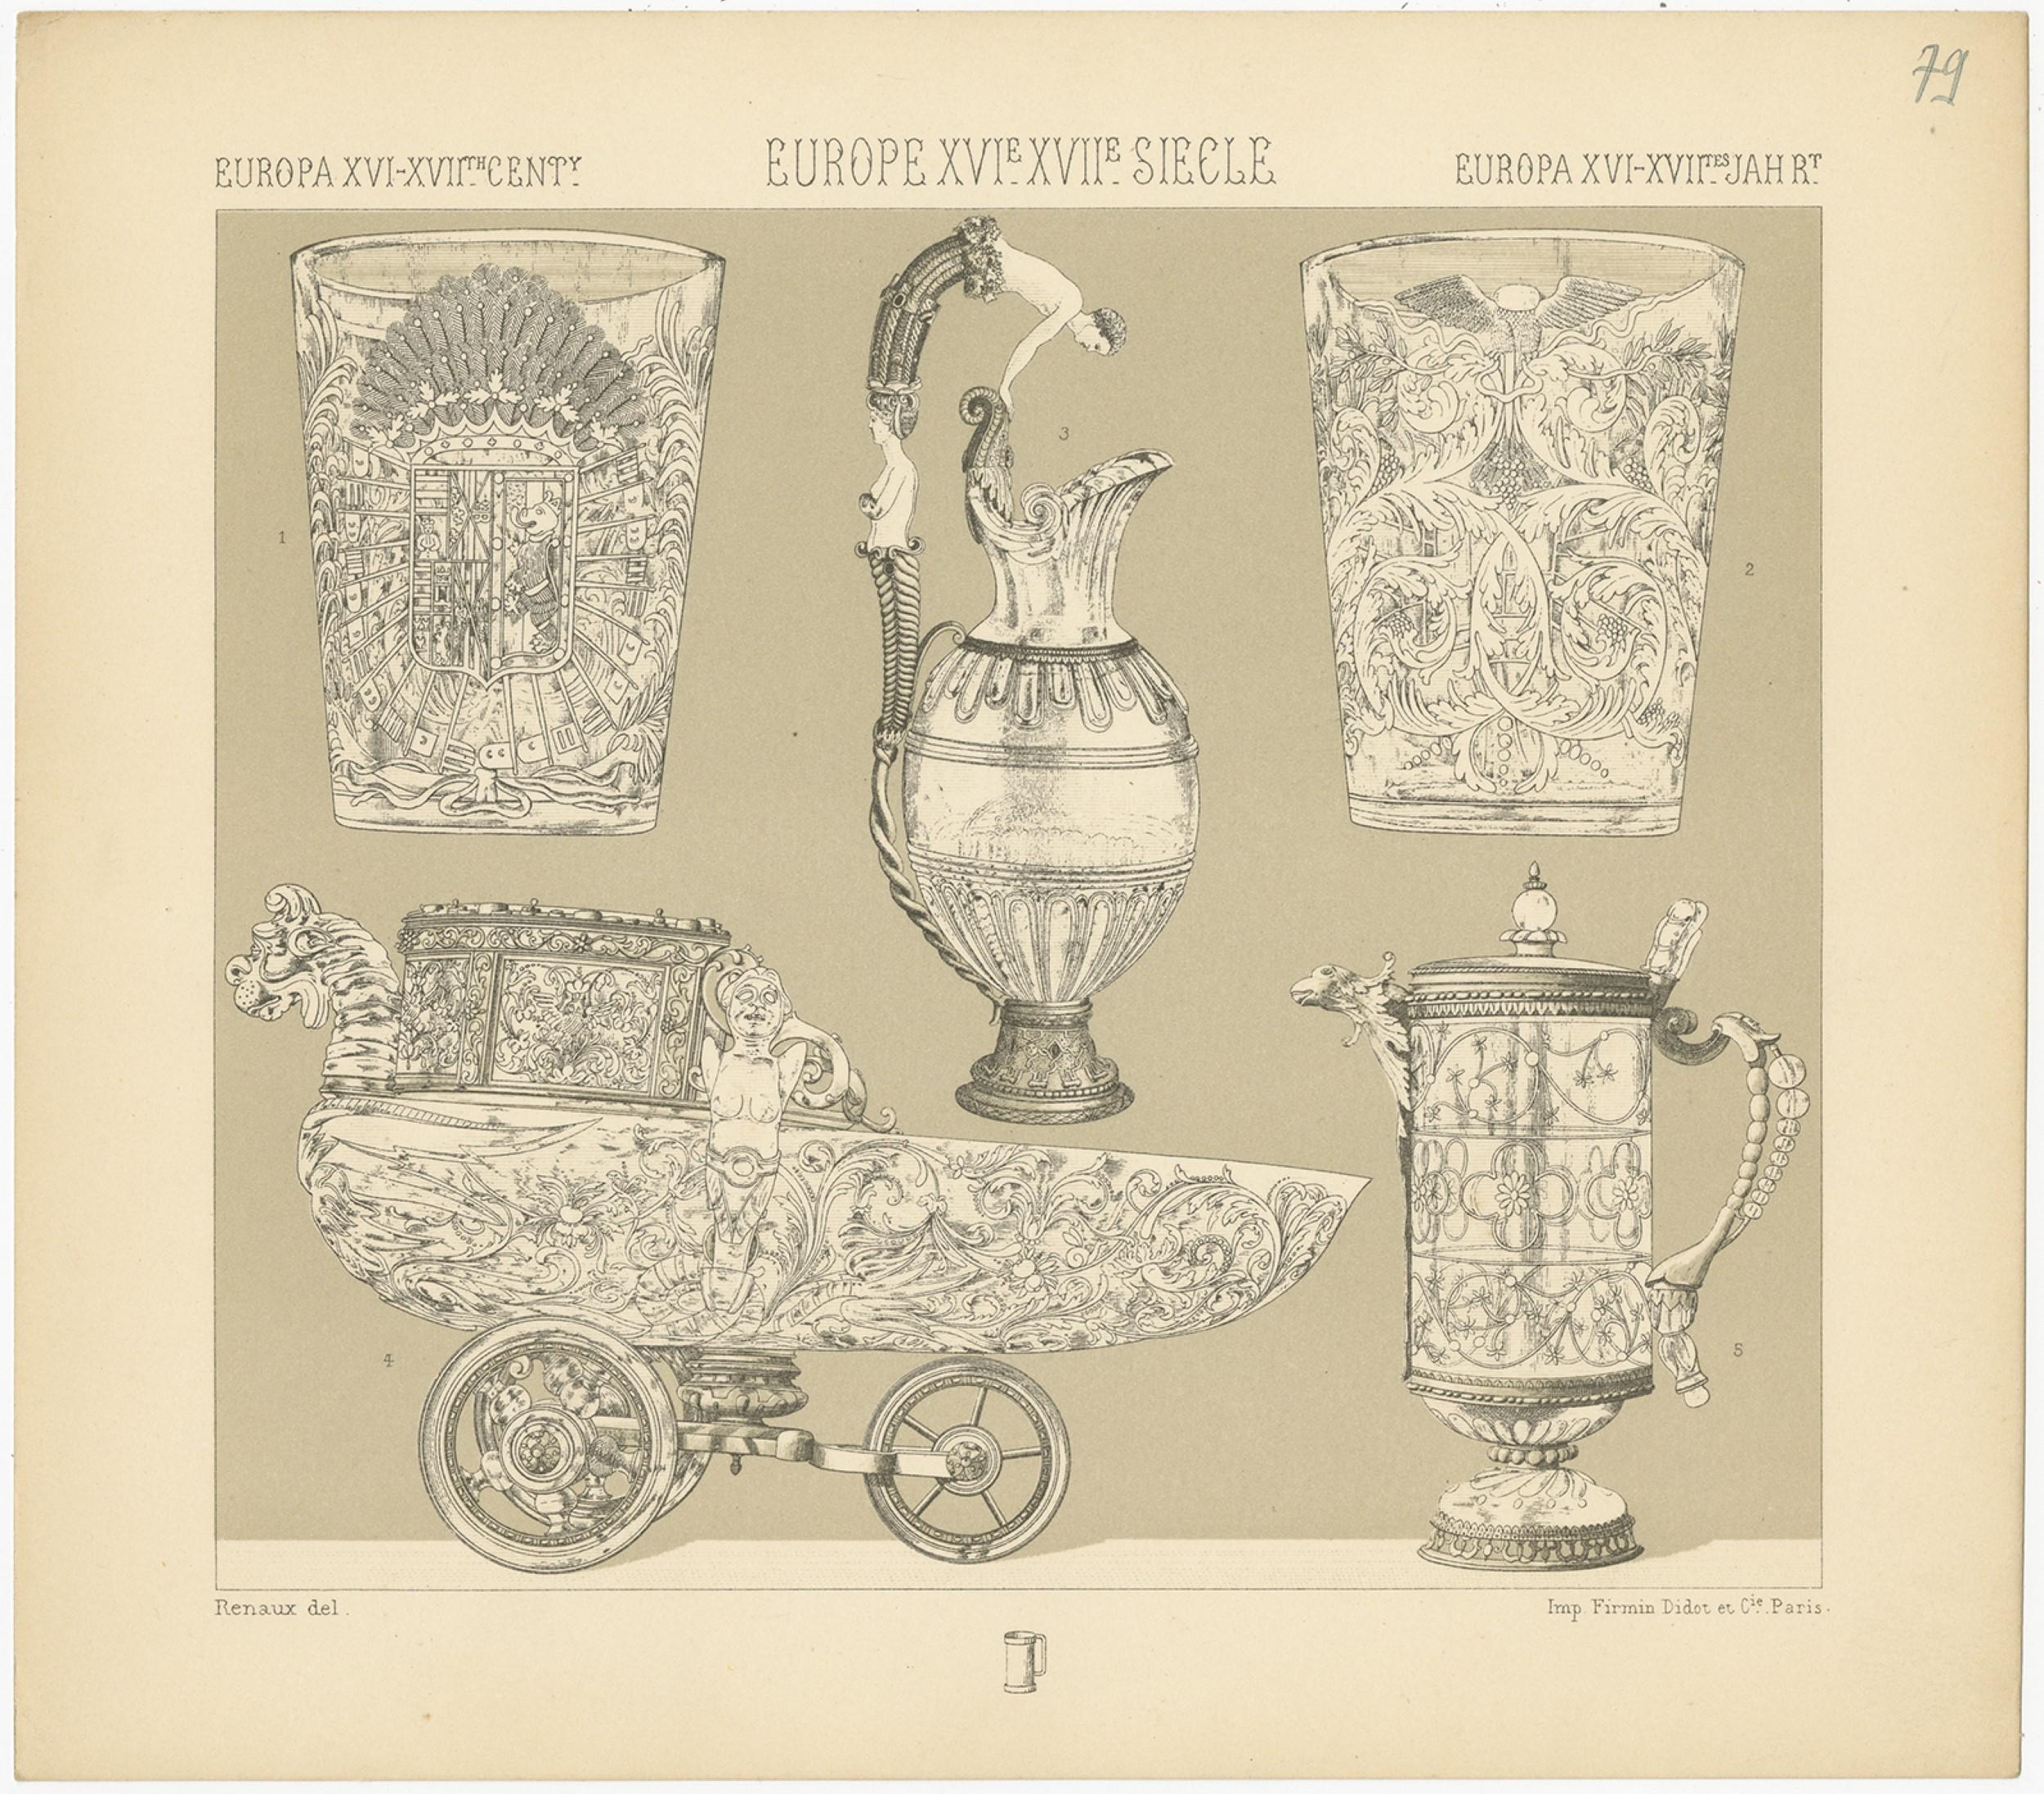 Antique print titled 'Europa XVI, XVIIth Cent - Europe XVIe, XVIIe Siecle - Europa XVIt, XVIItes Jahr'. Chromolithograph of European XVIth-XVIIth Decorative Objects. This print originates from 'Le Costume Historique' by M.A. Racinet. Published,